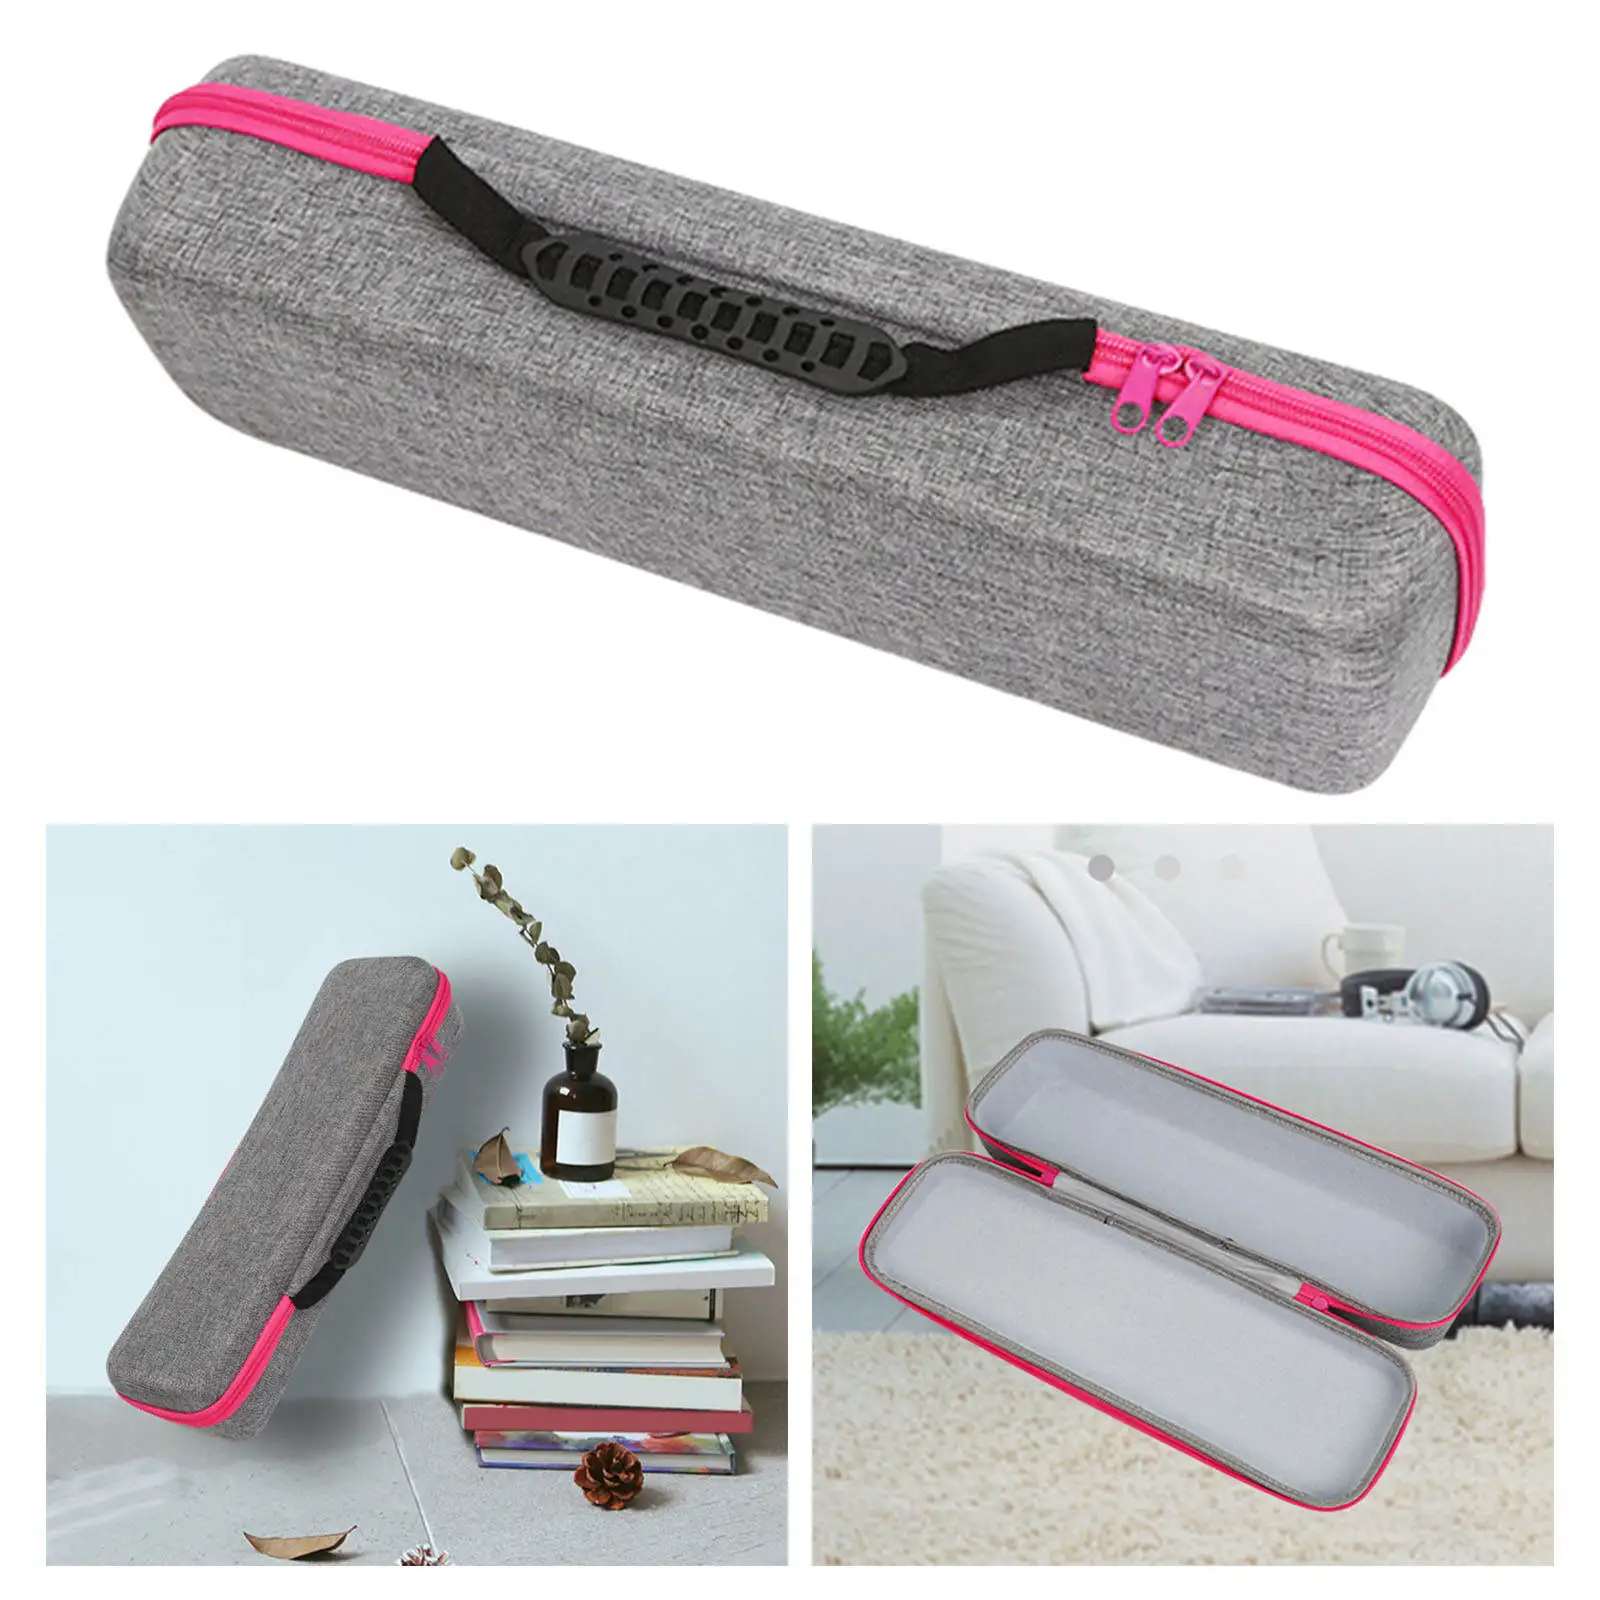 EVA Hard Carry Case Hair Straightener Storage Bag Protective Cover Protect Pouch for Curling Irons Styler Styler